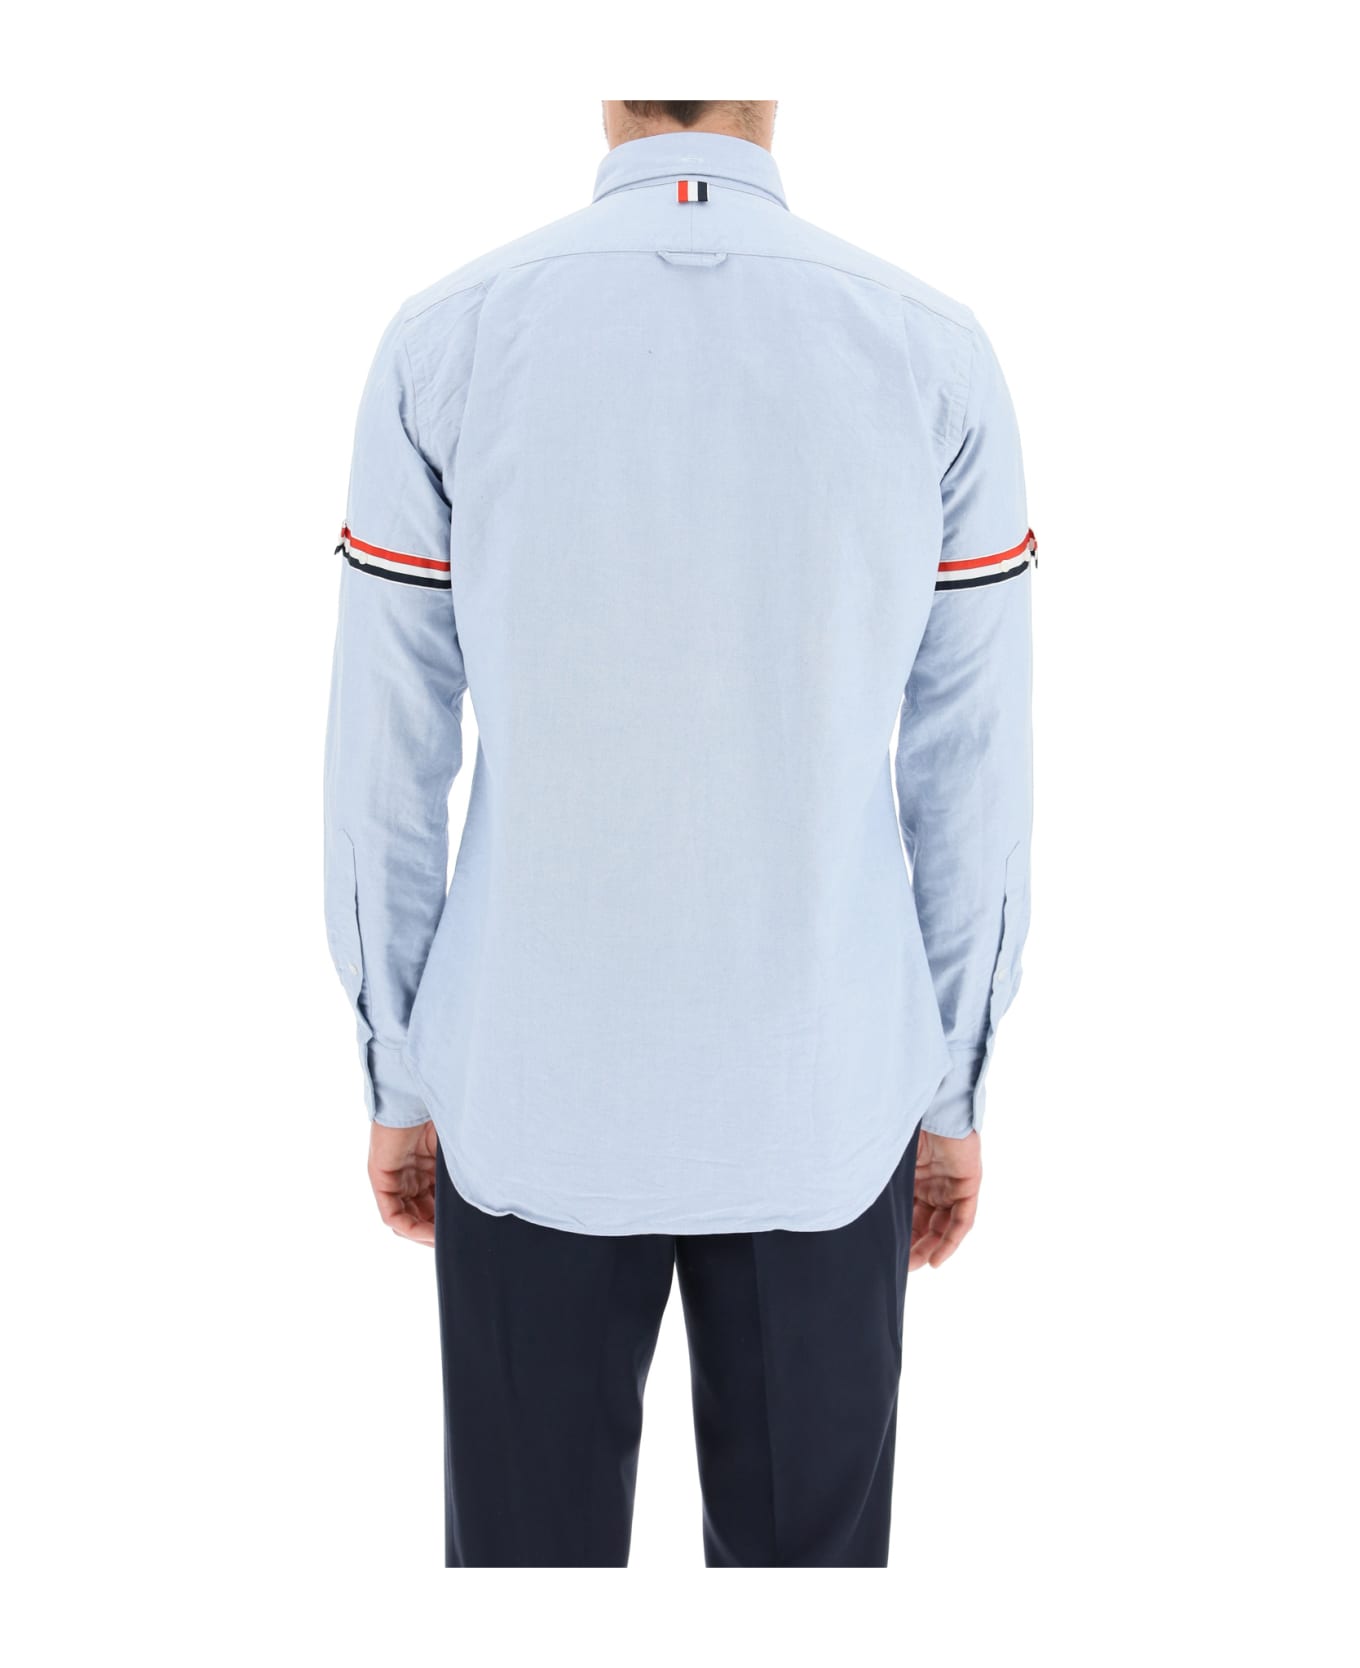 Thom Browne Shirt With Tricolor Ribbon - BLUE